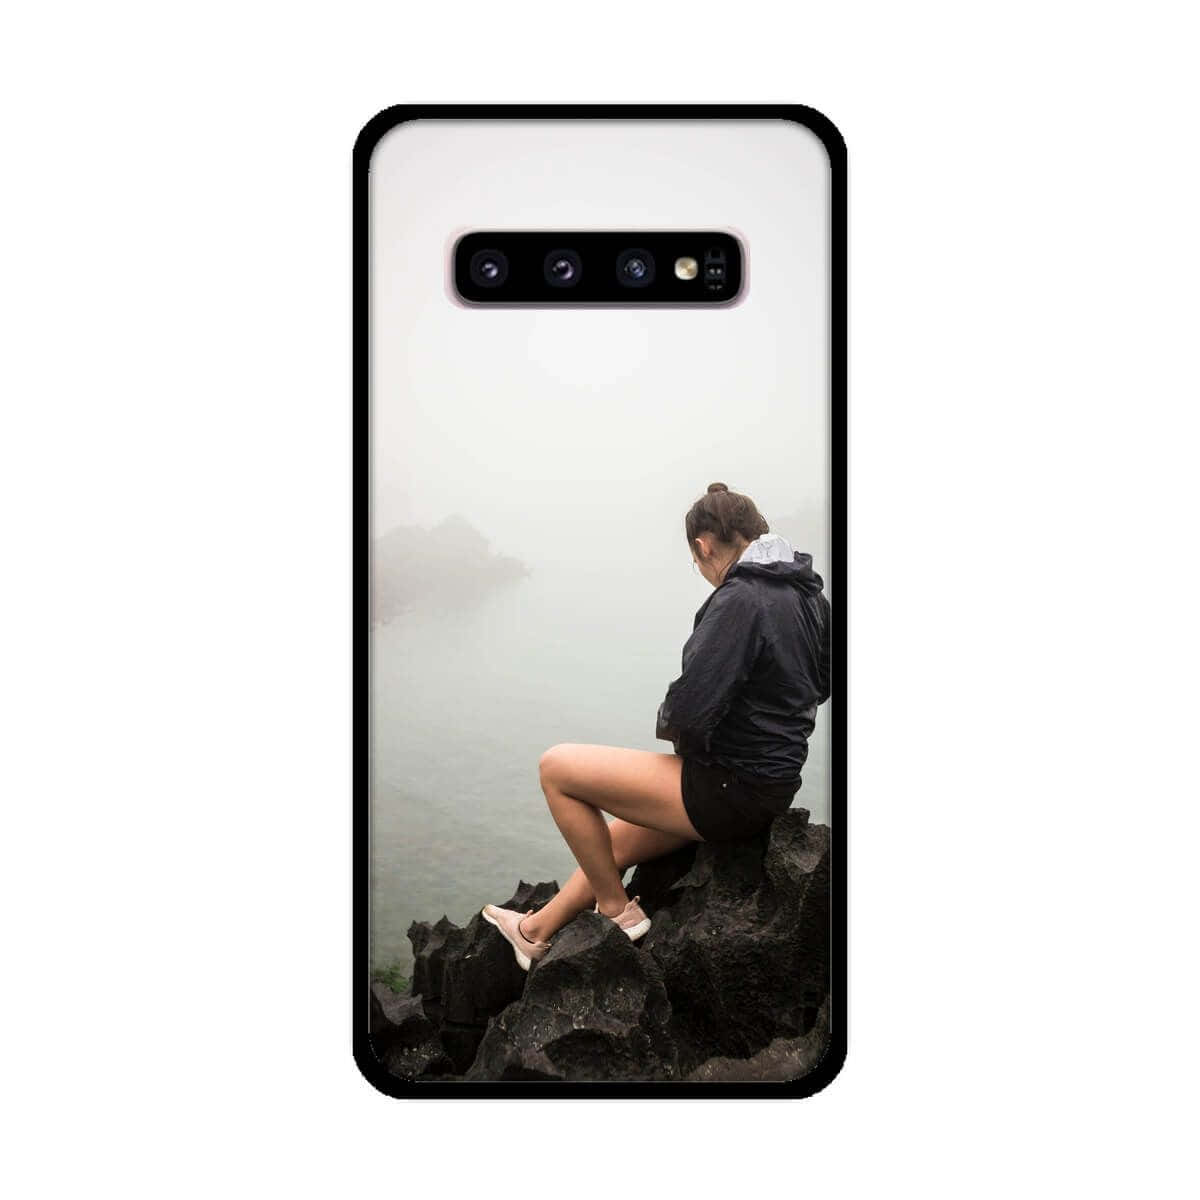 Check Out the Incredible Features of the Galaxy S10 Phone